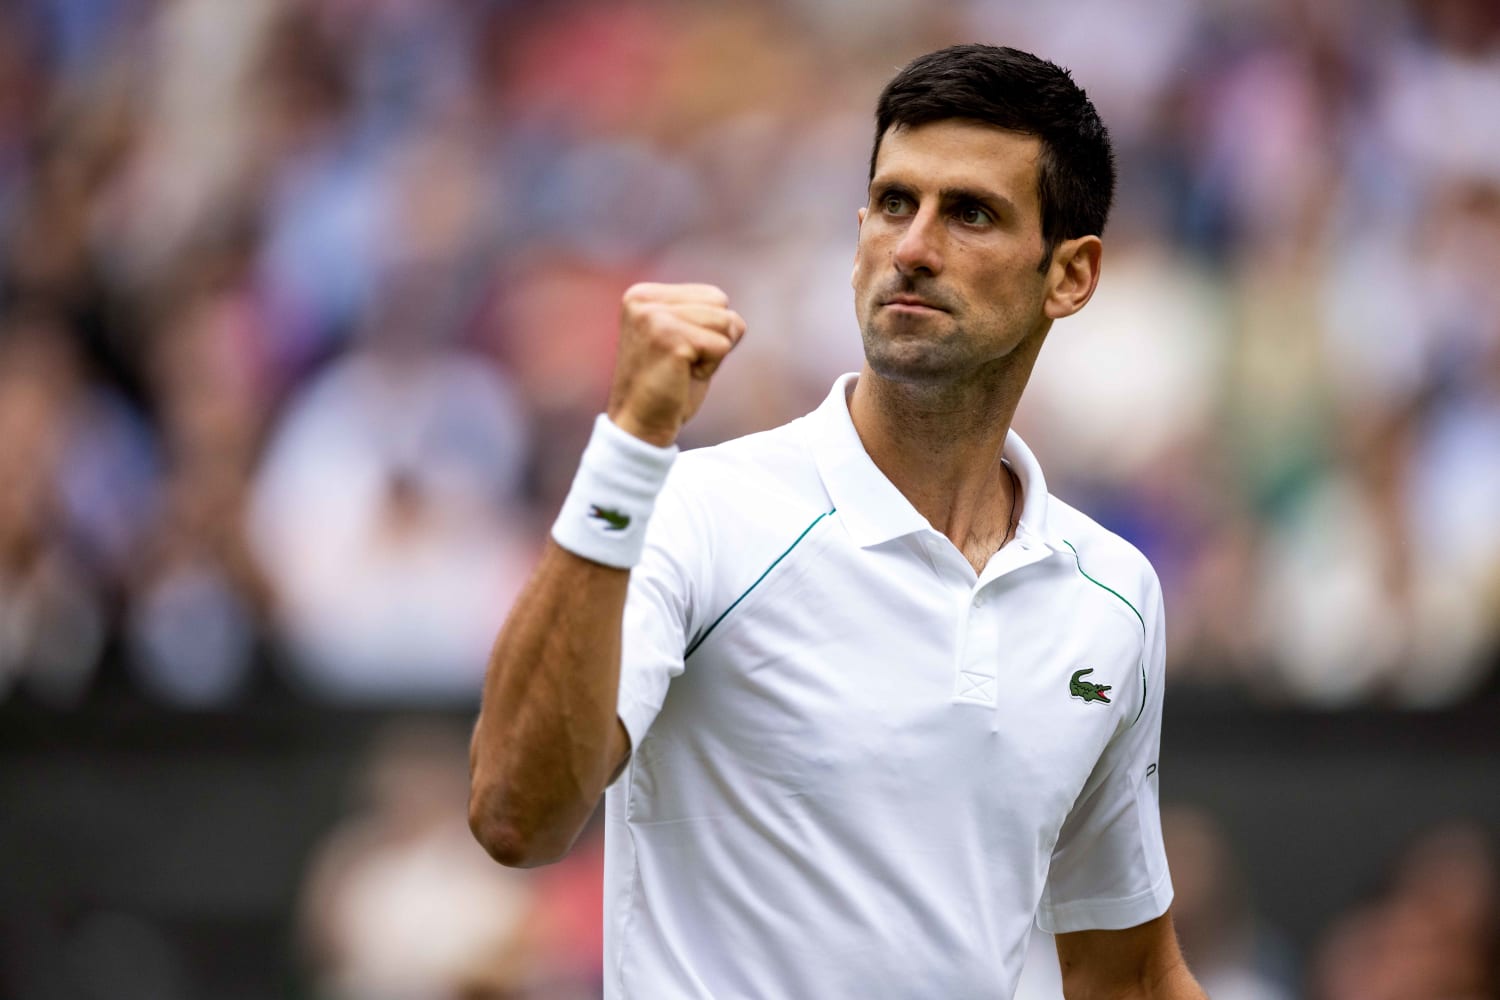 Unvaccinated tennis star Djokovic ‘grateful’ after visa victory, vows to compete in Australia